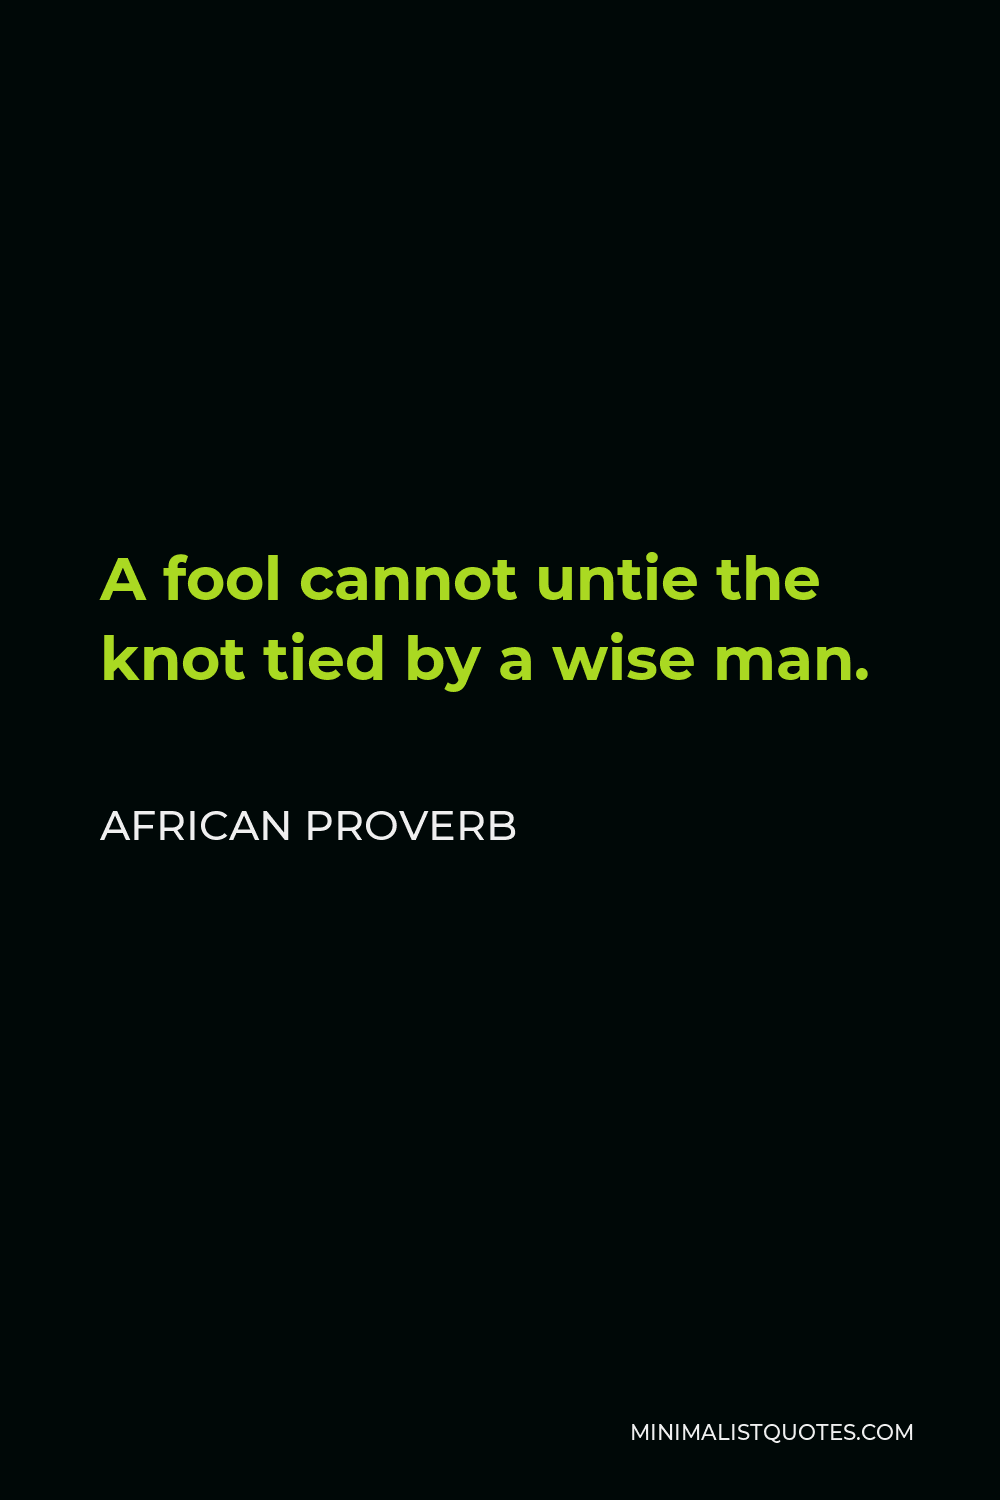 African Proverb Quote - A fool cannot untie the knot tied by a wise man.